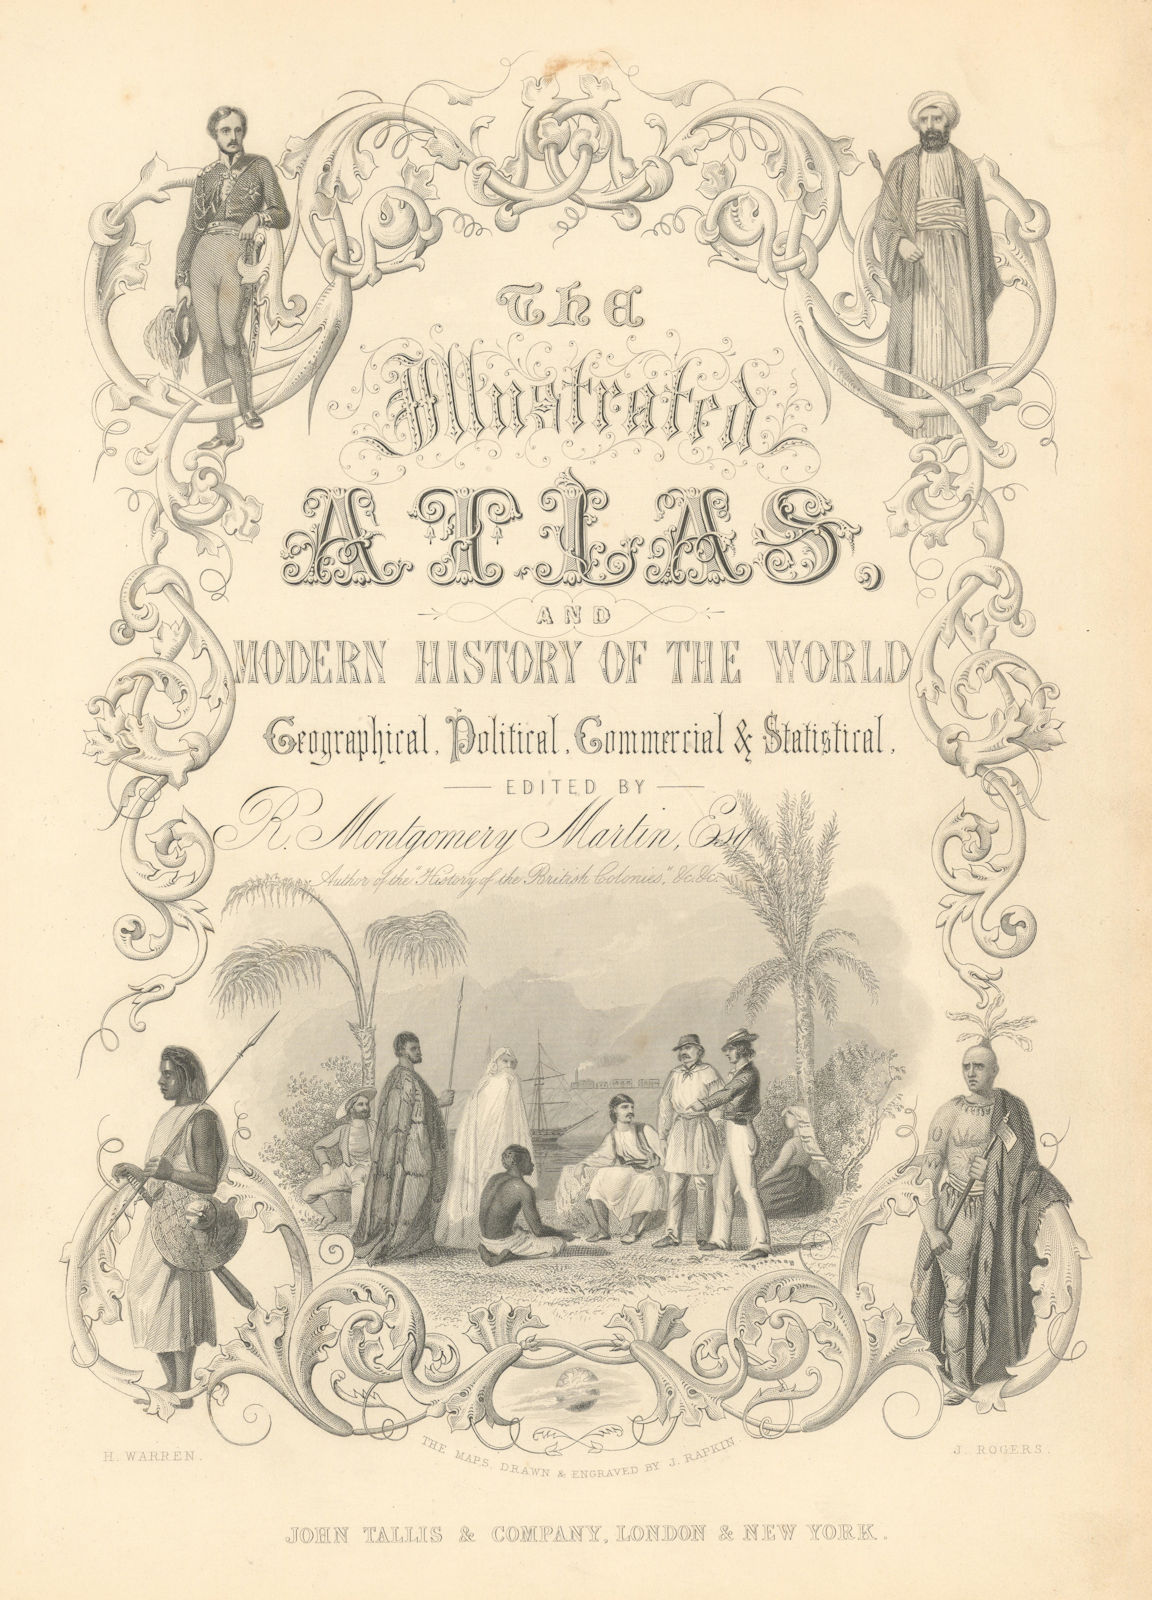 TALLIS ILLUSTRATED ATLAS TITLE PAGE. Figures represent four continents 1851